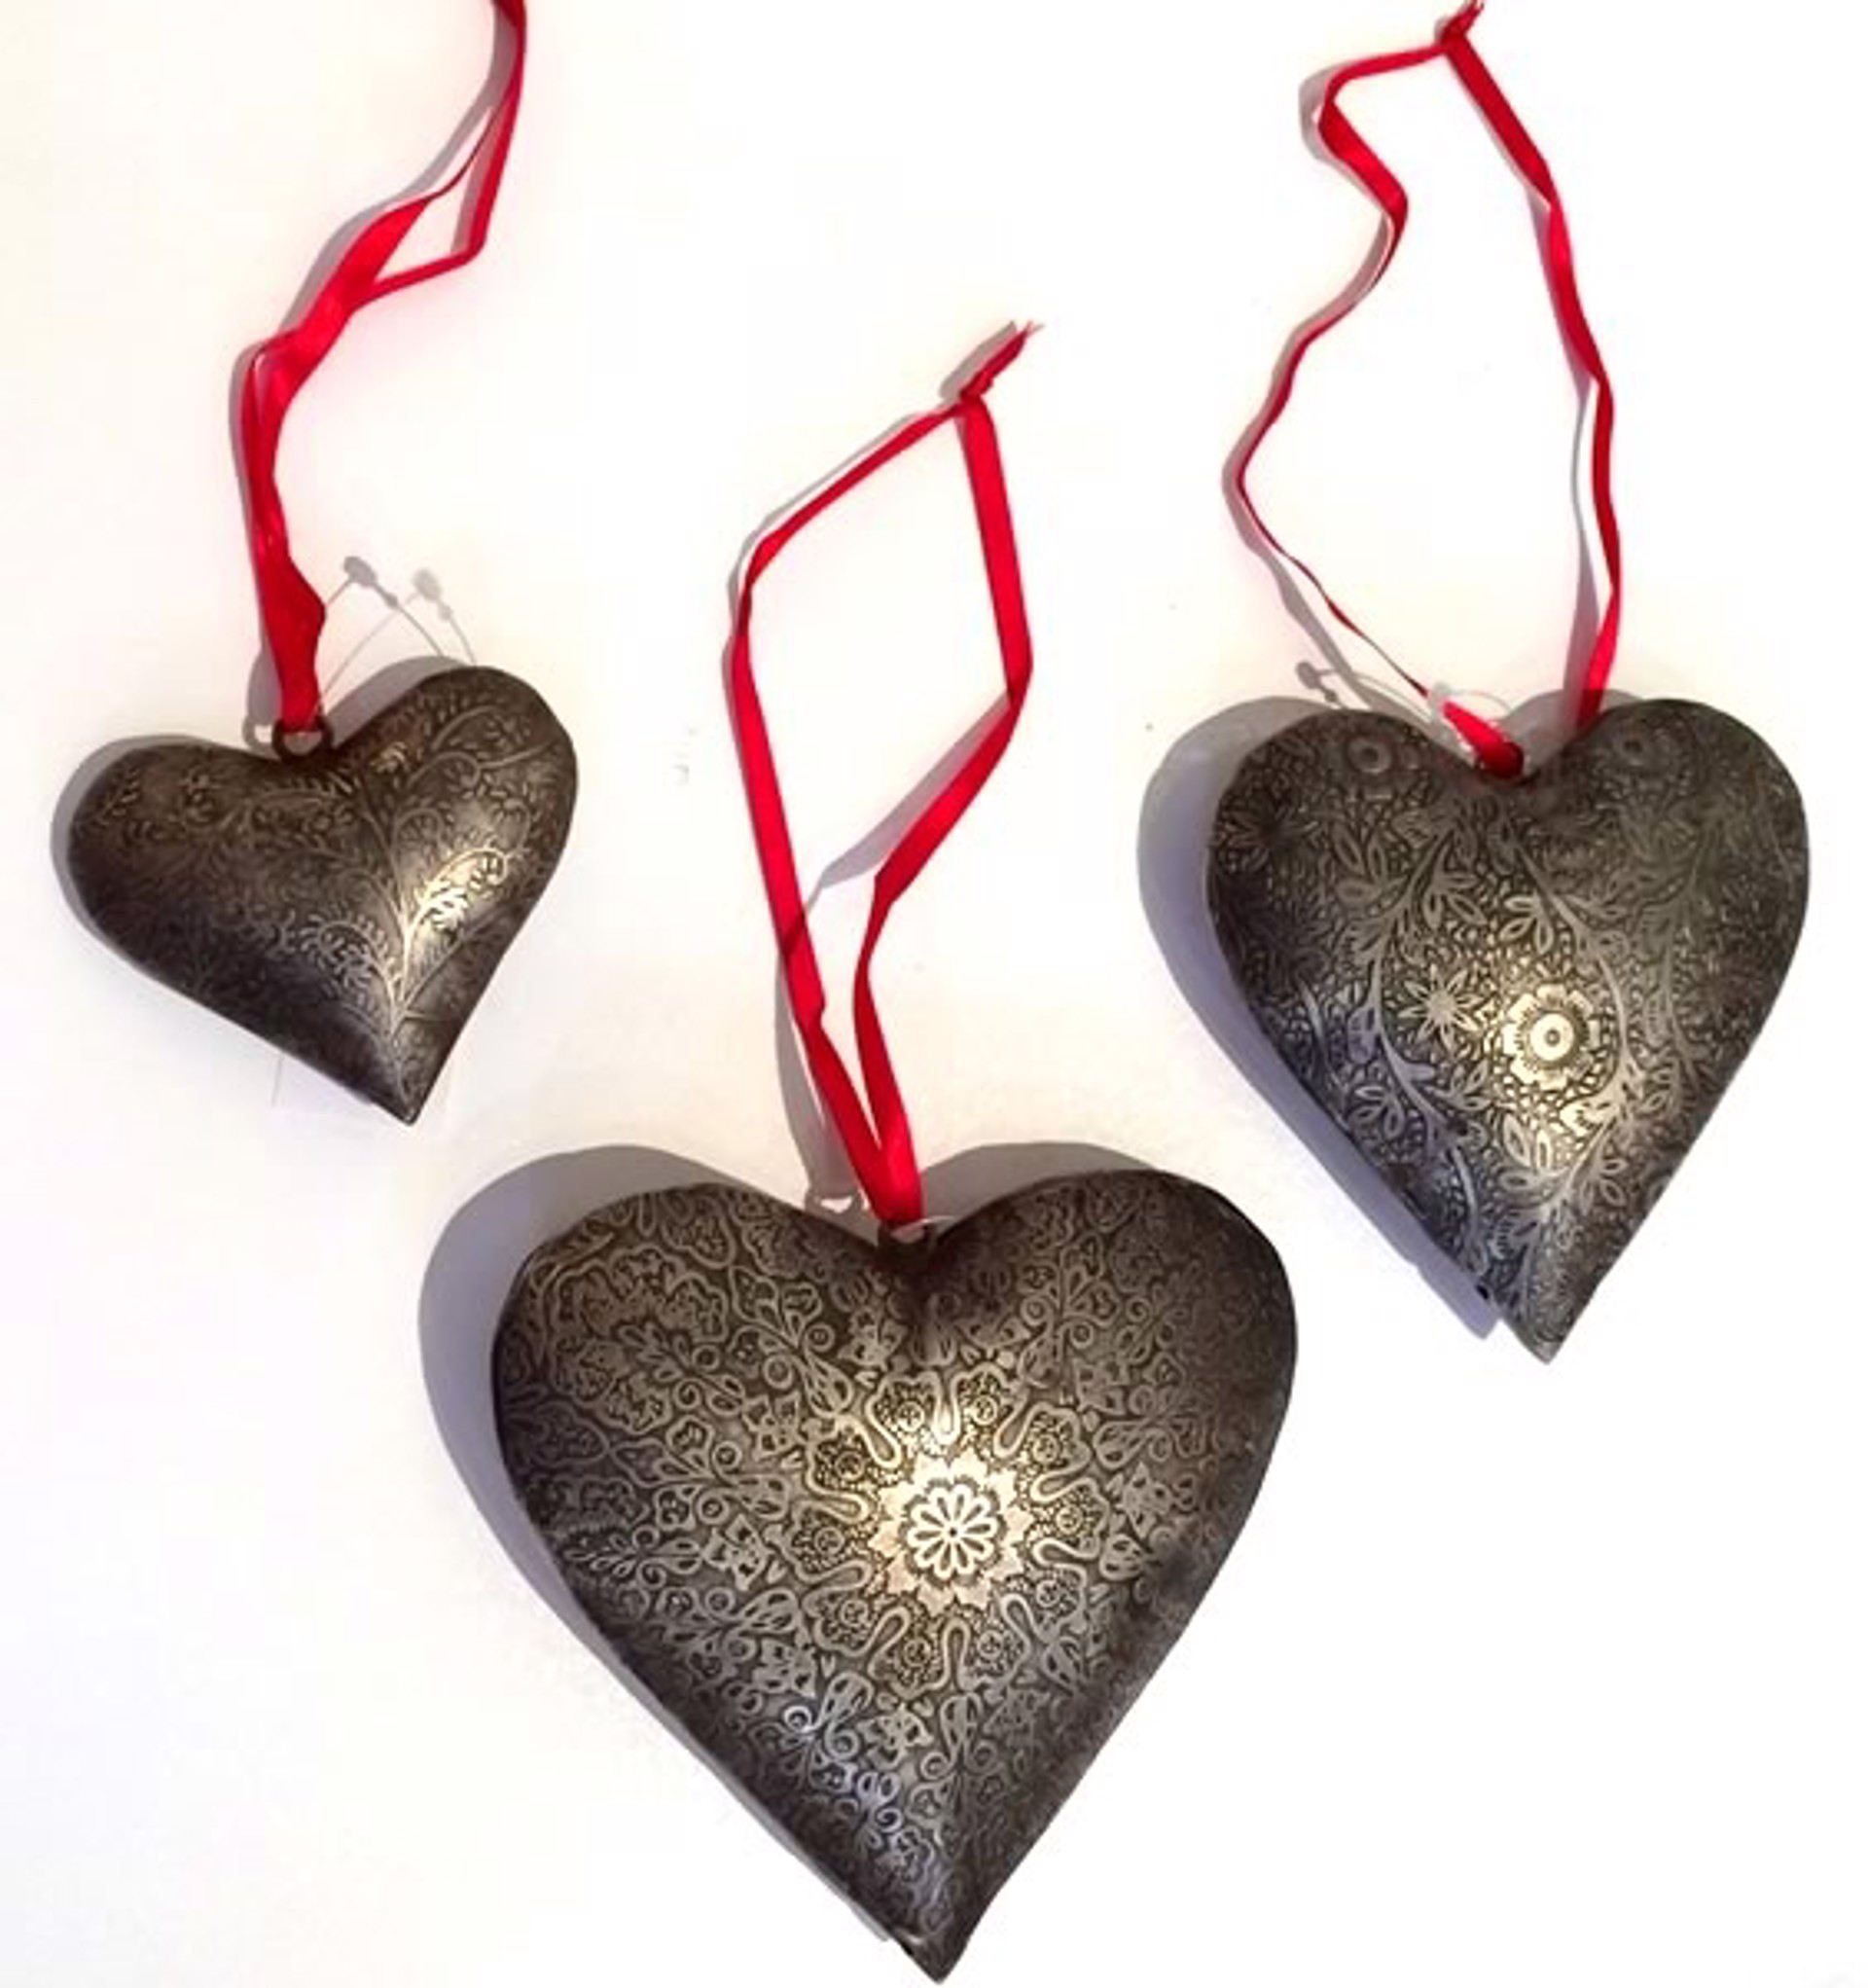 Ornament - 5.5" Etched Metal Heart by Indigo Desert Ranch - Gift